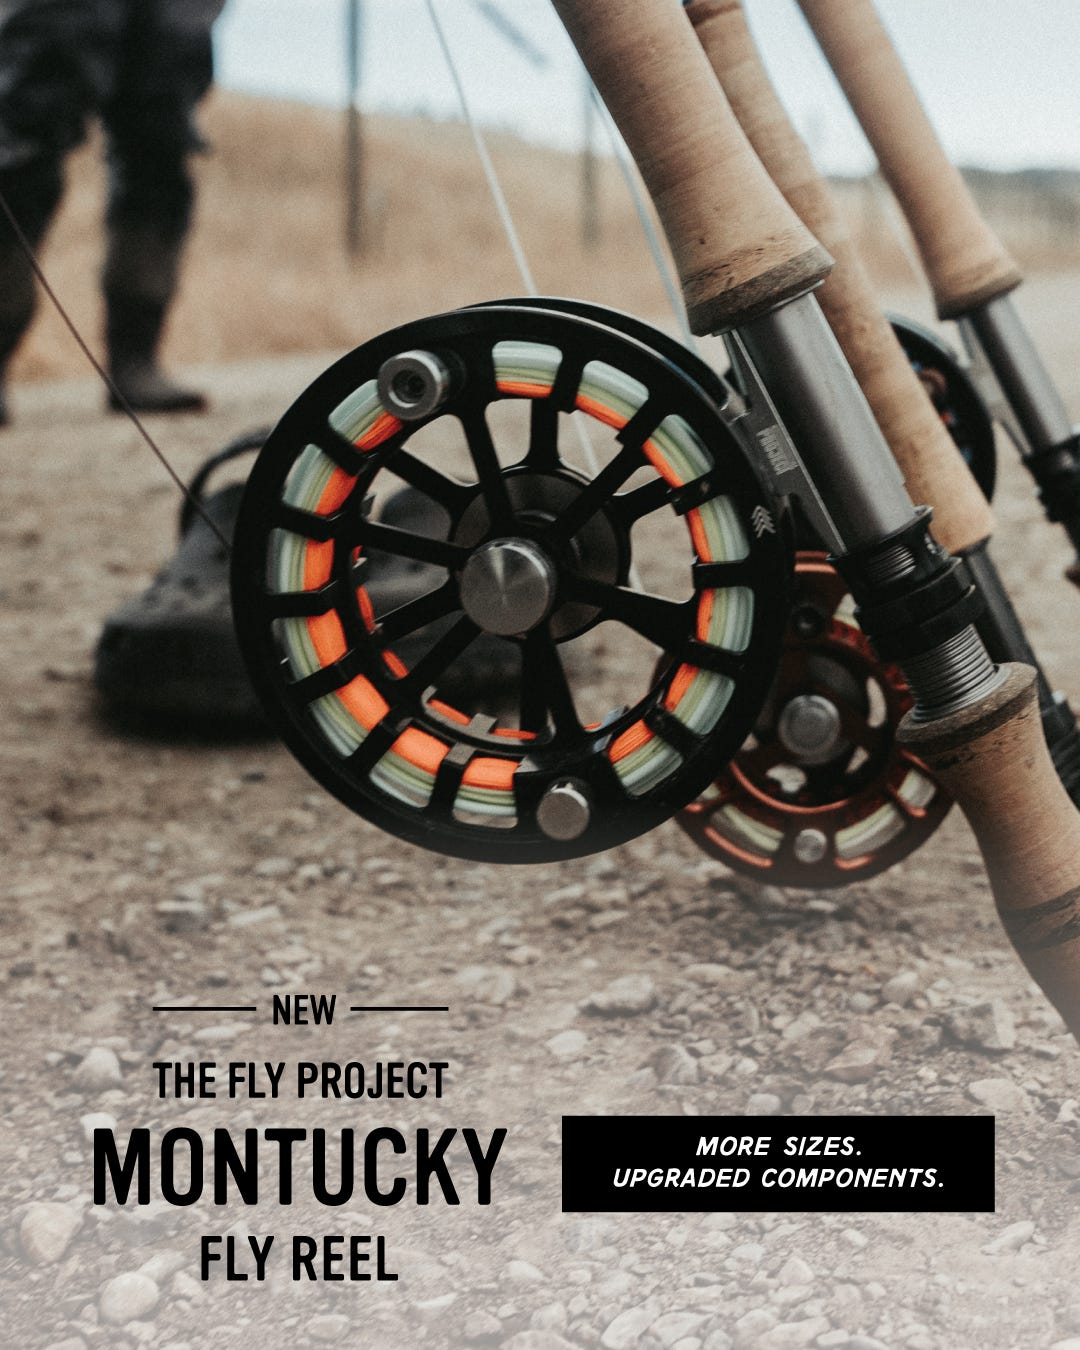 The New Fly Project Montucky Reel